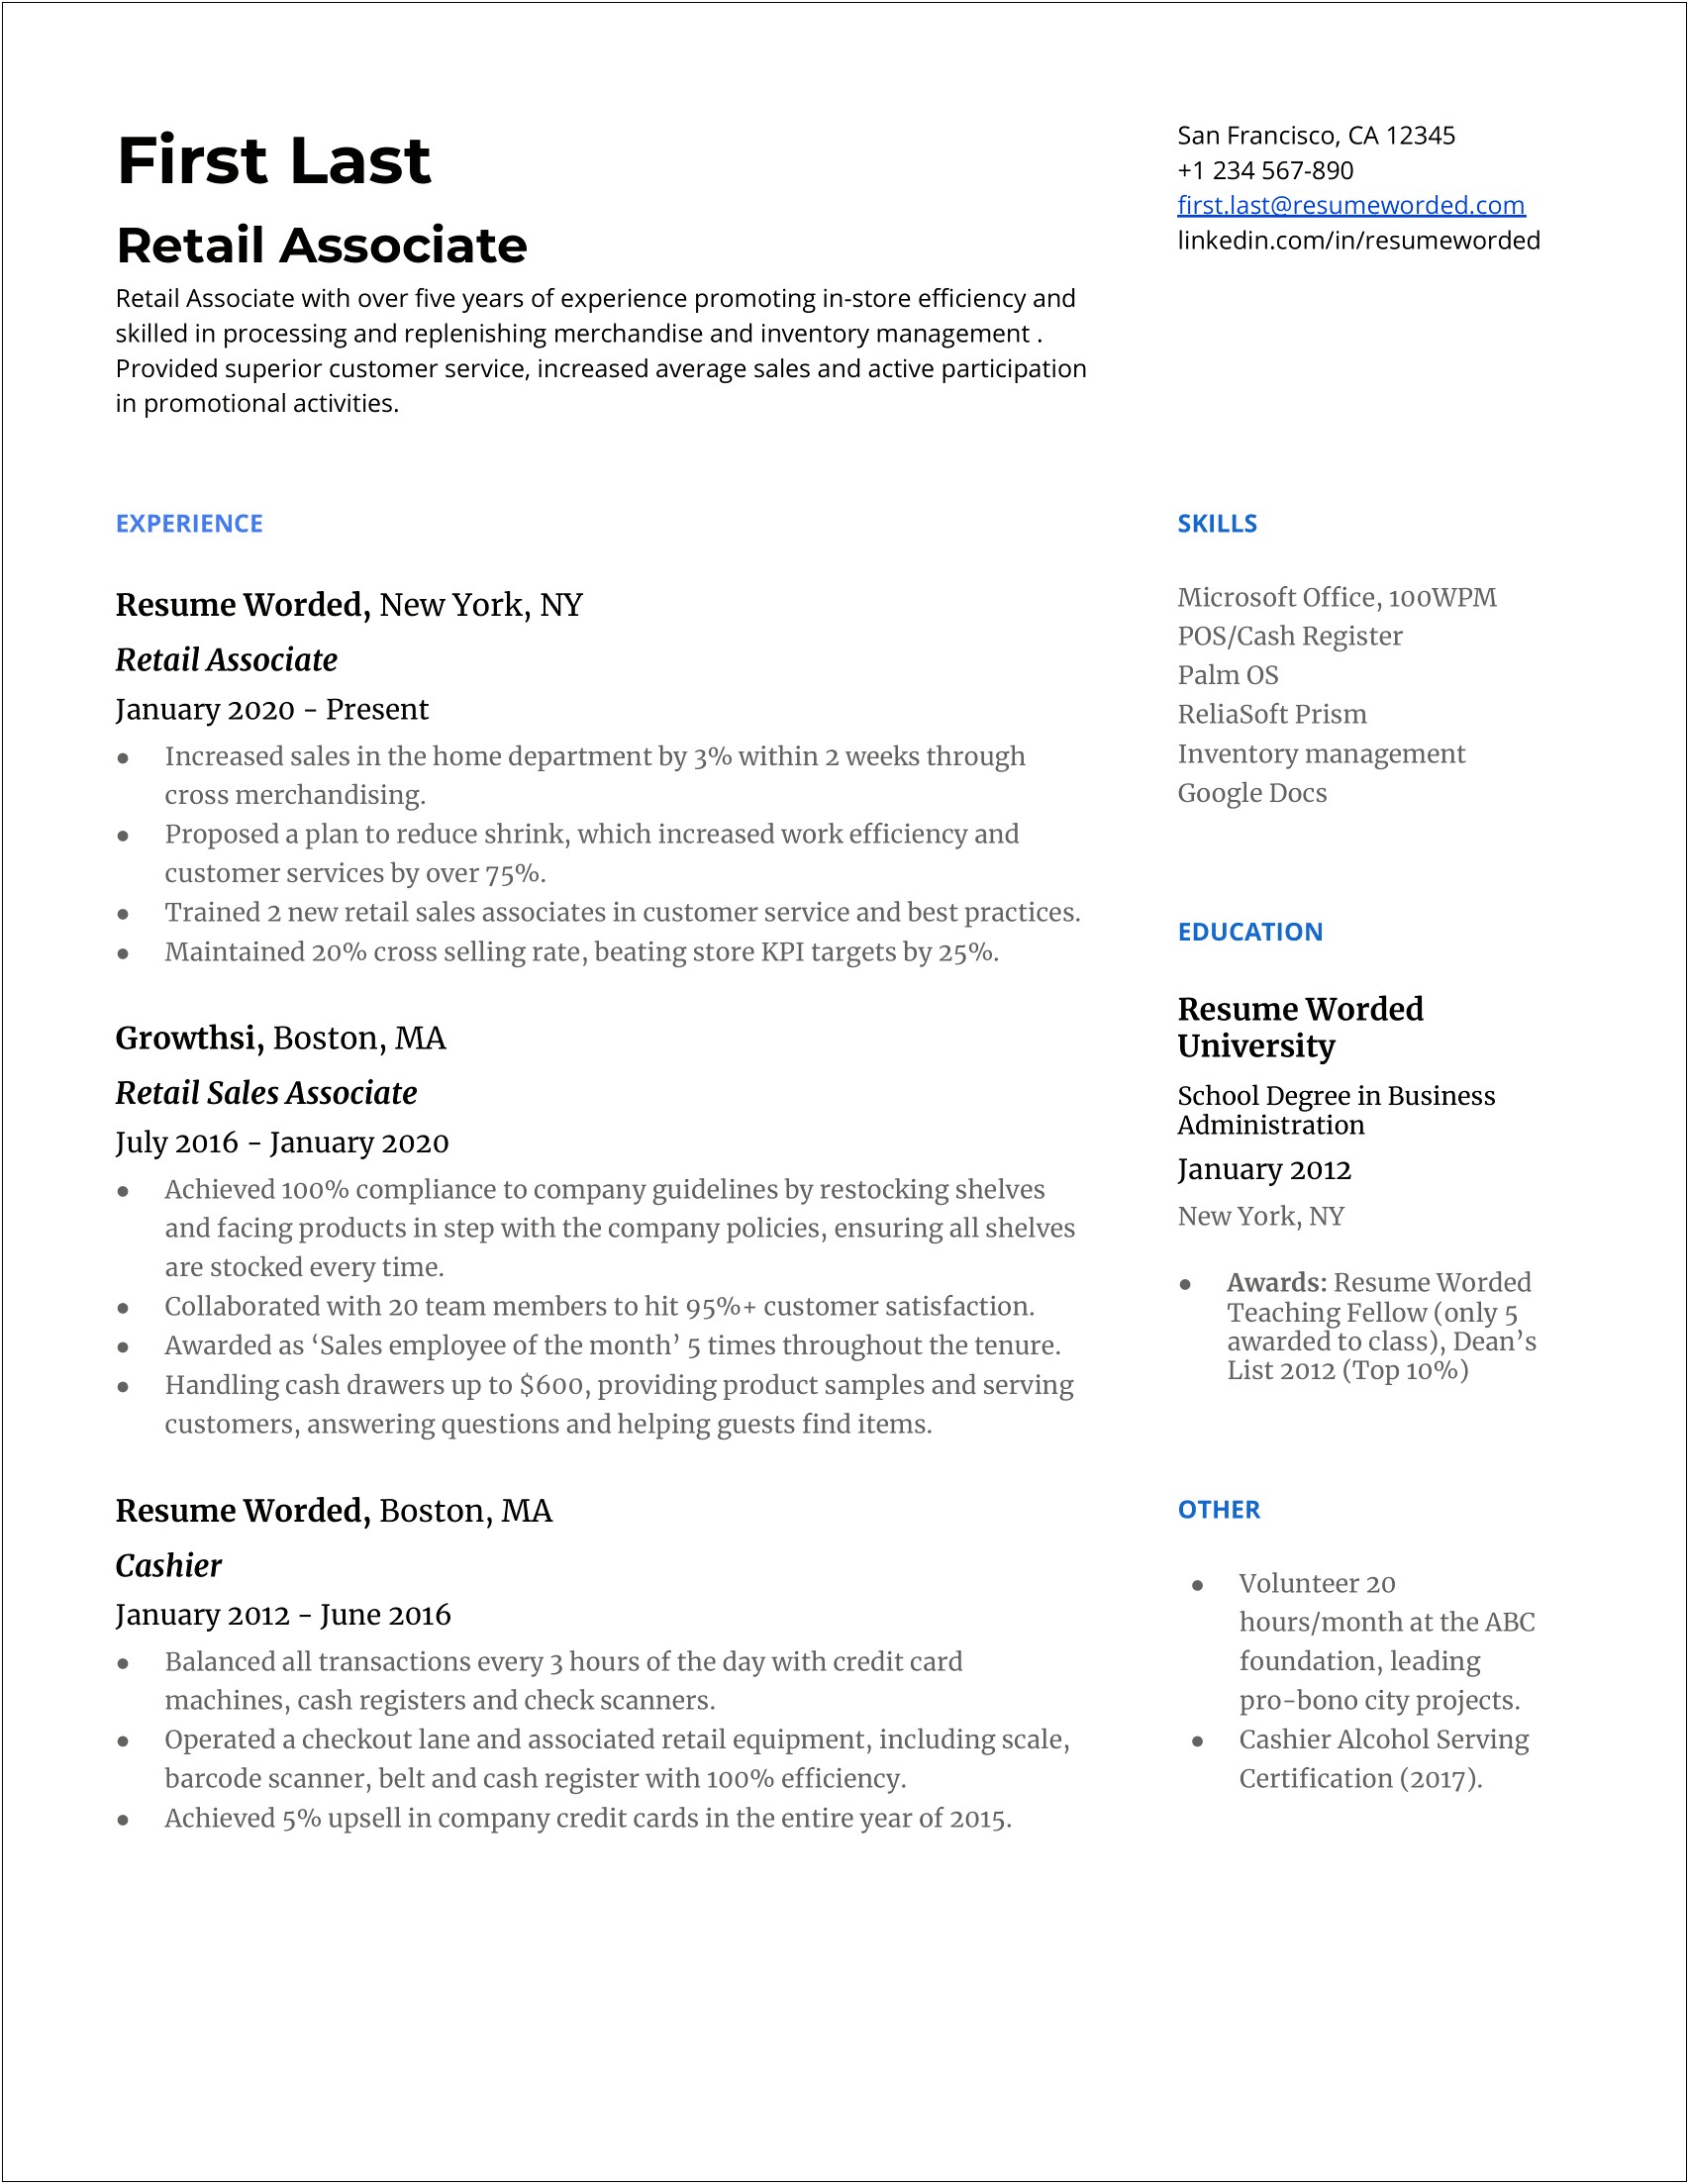 Resume Summary Examples For Retail Sales